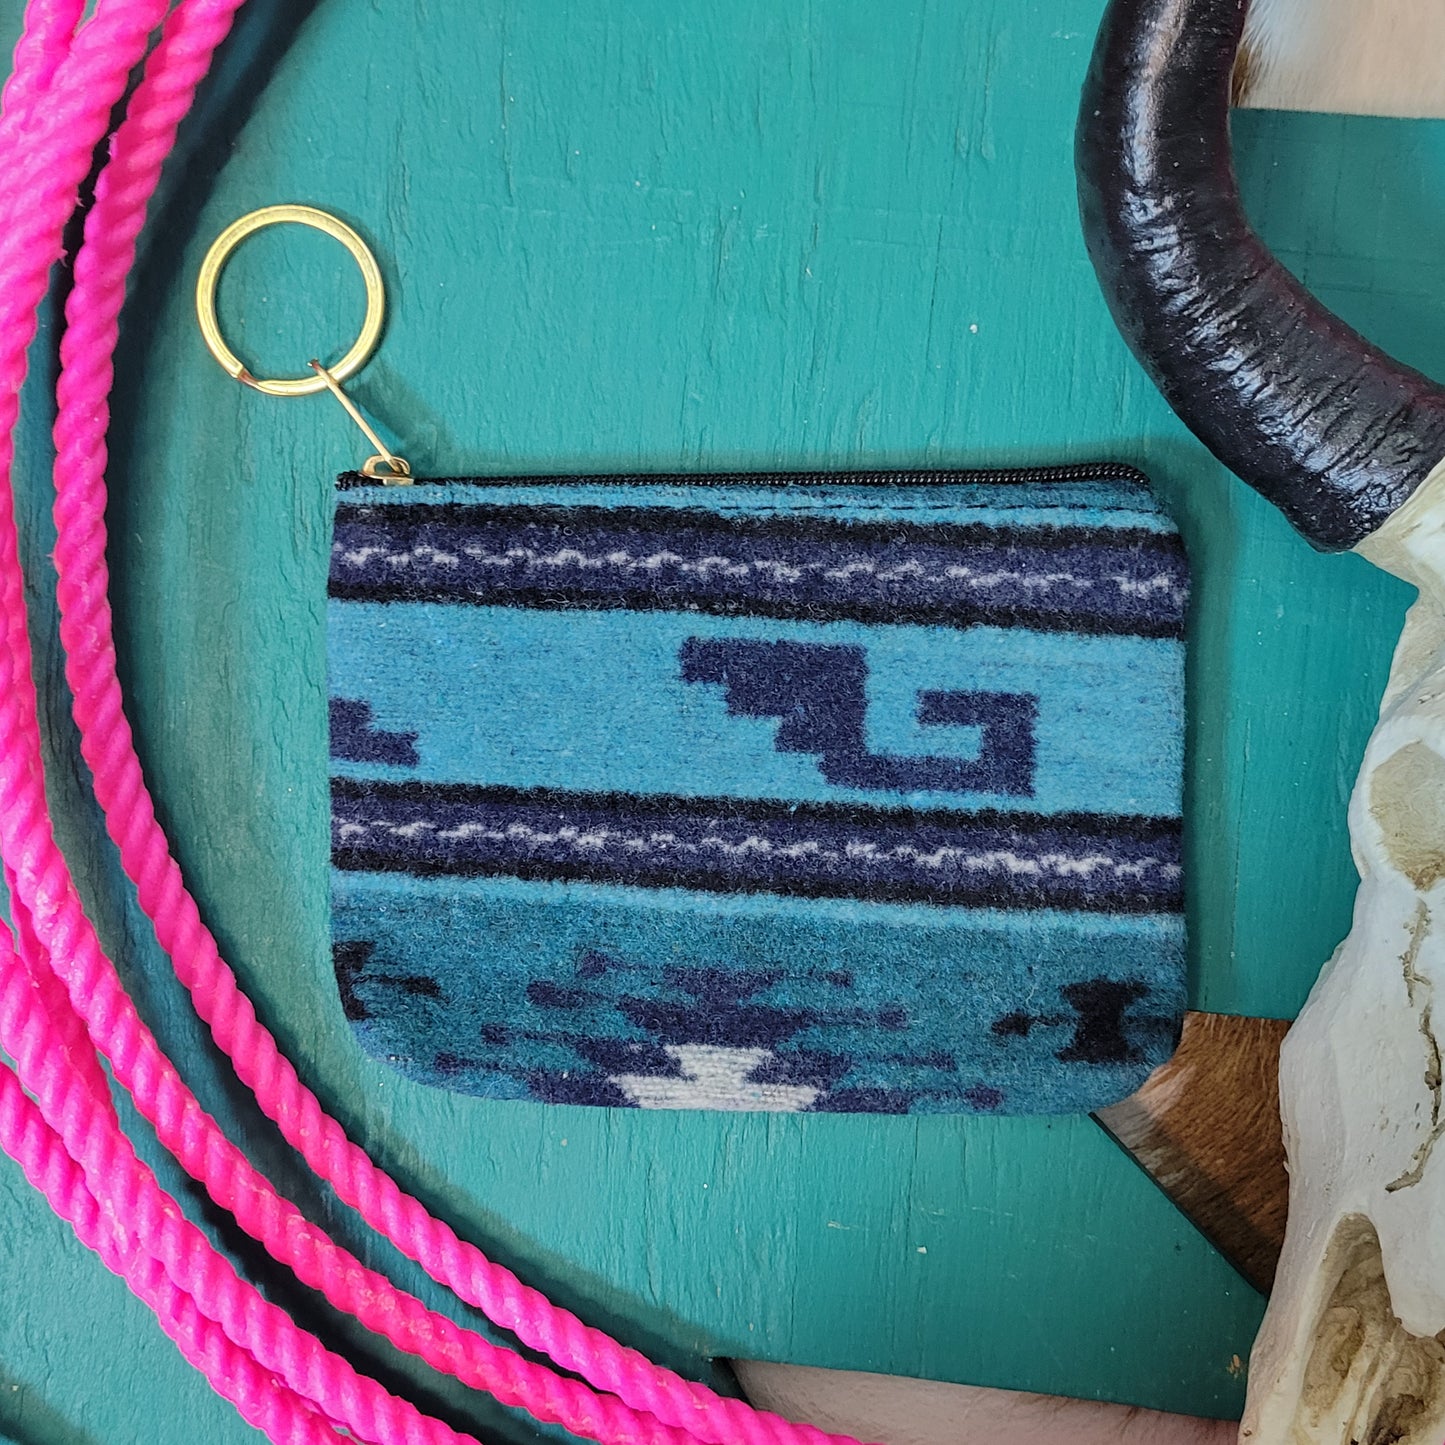 Darby Coin Purse [teal]